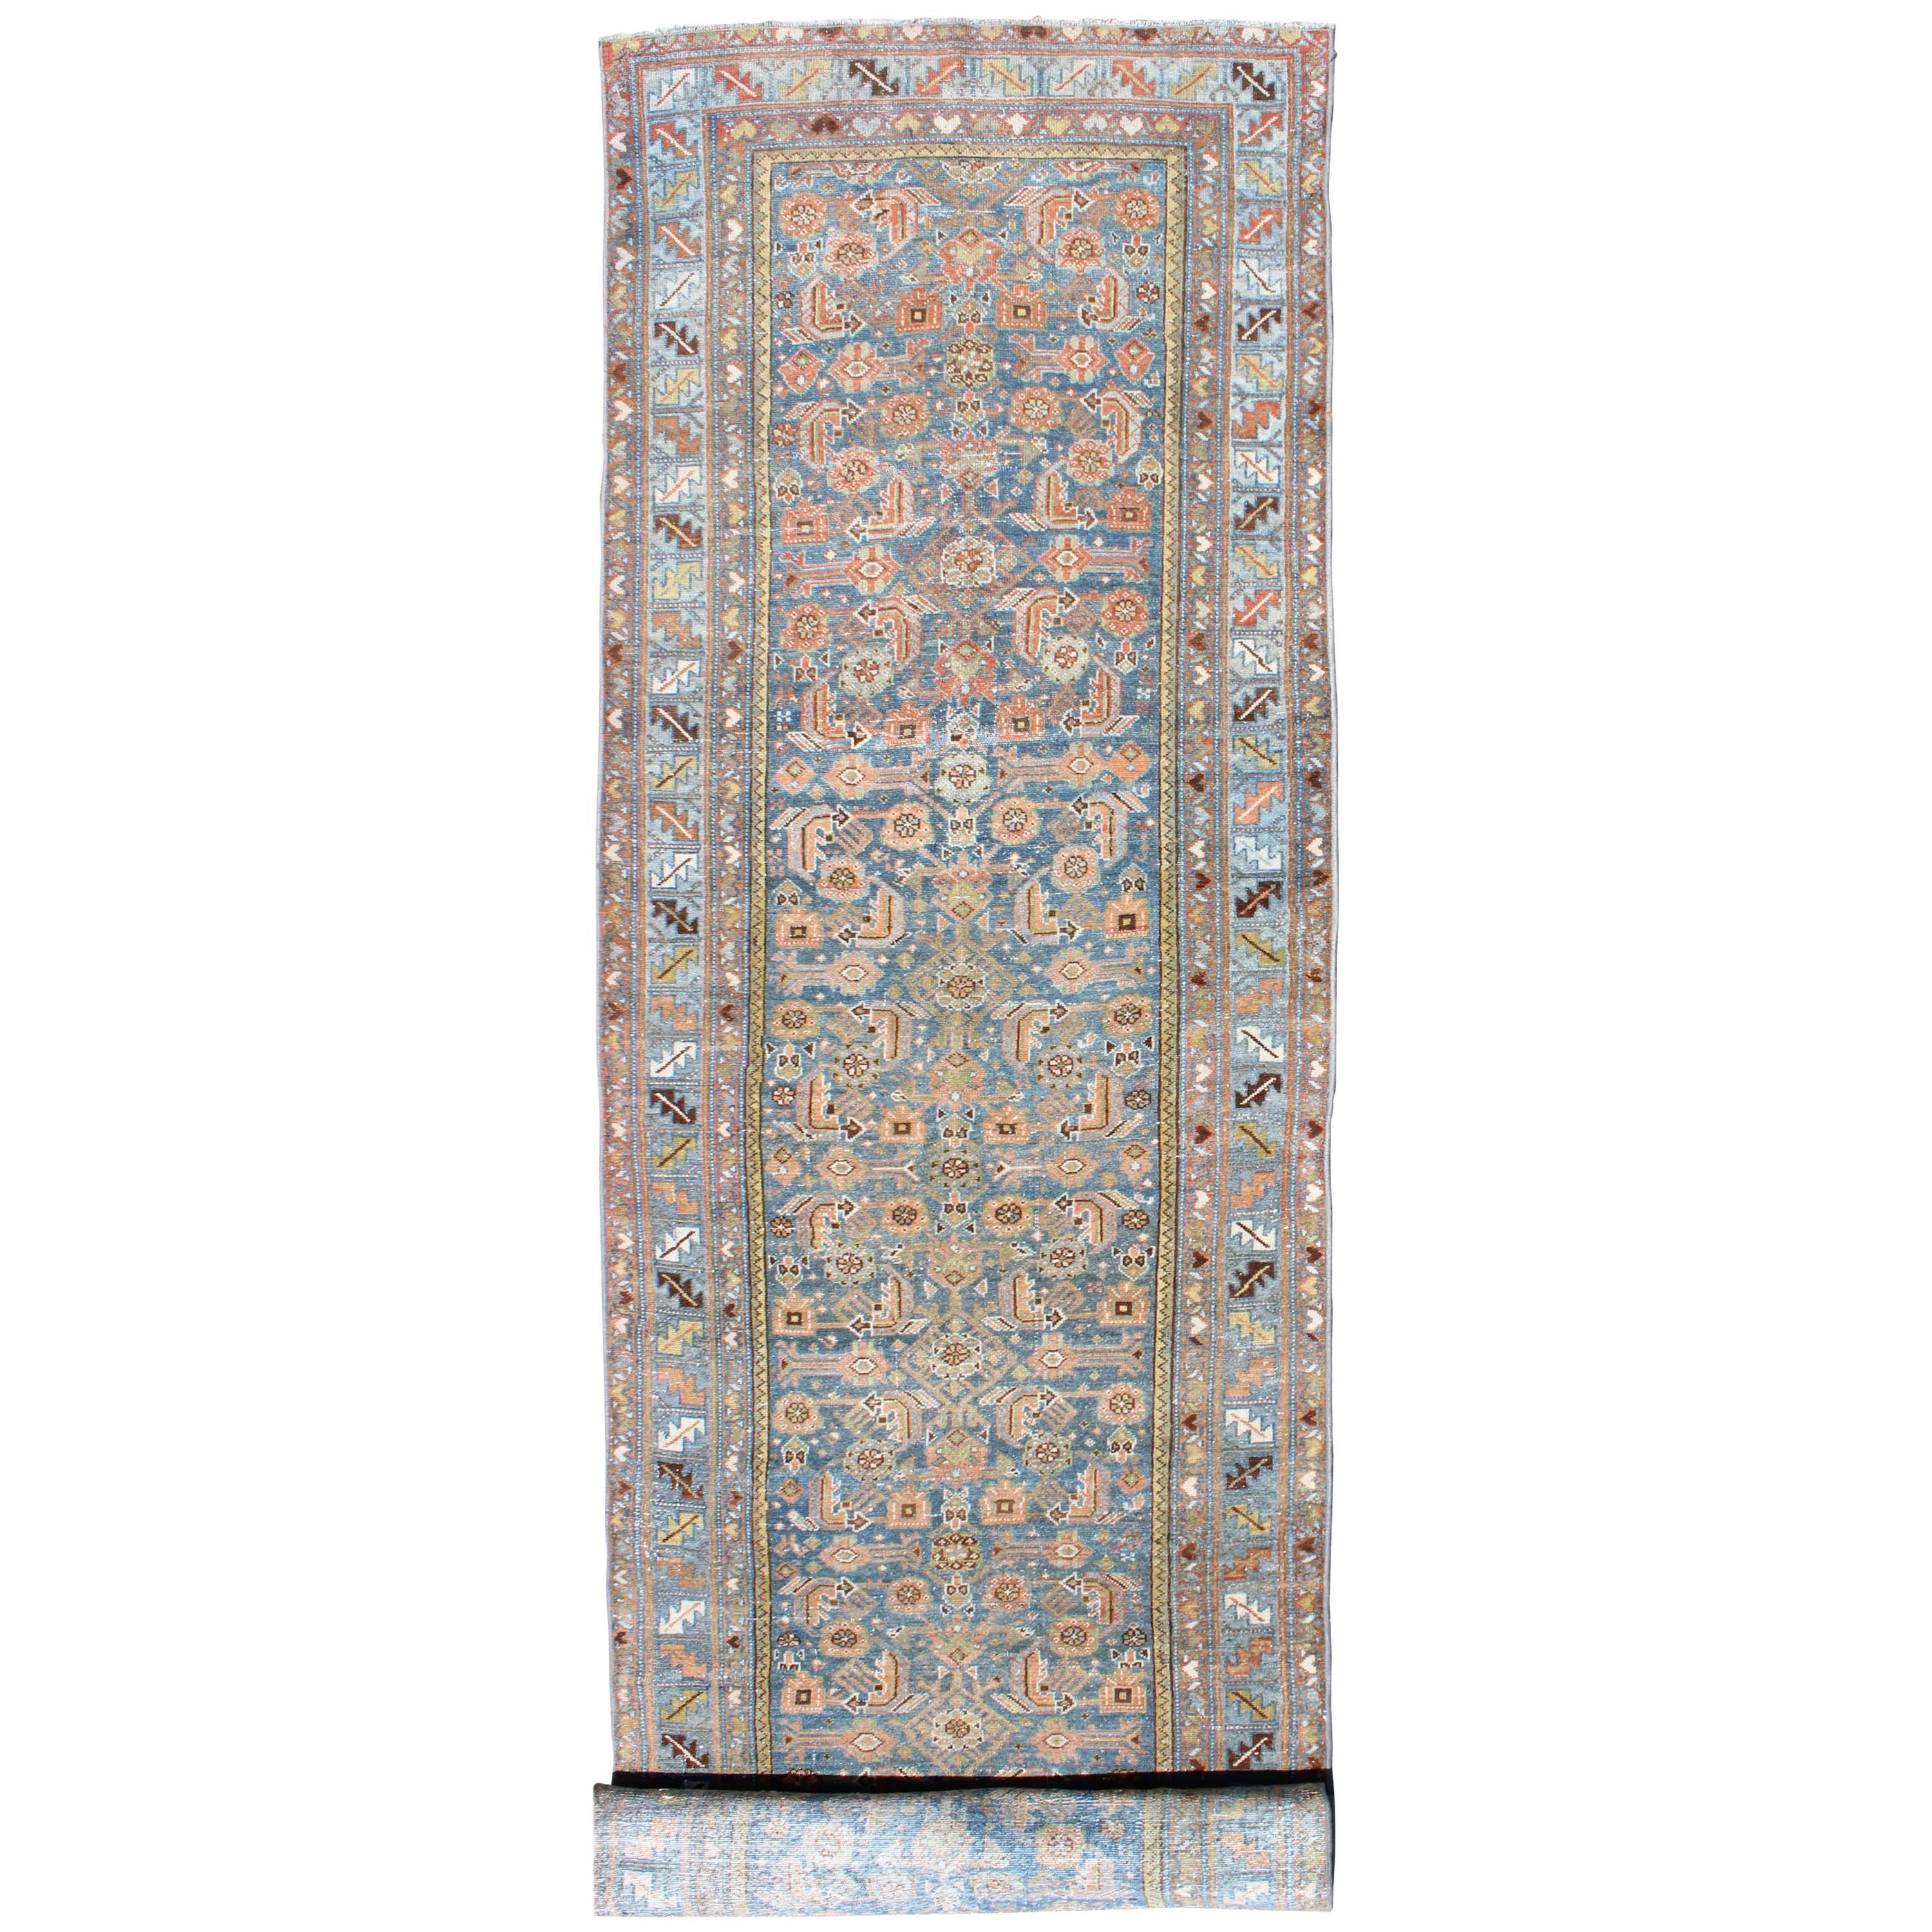 Antique Persian Malayer Runner in Light Blue and Salmon Pink